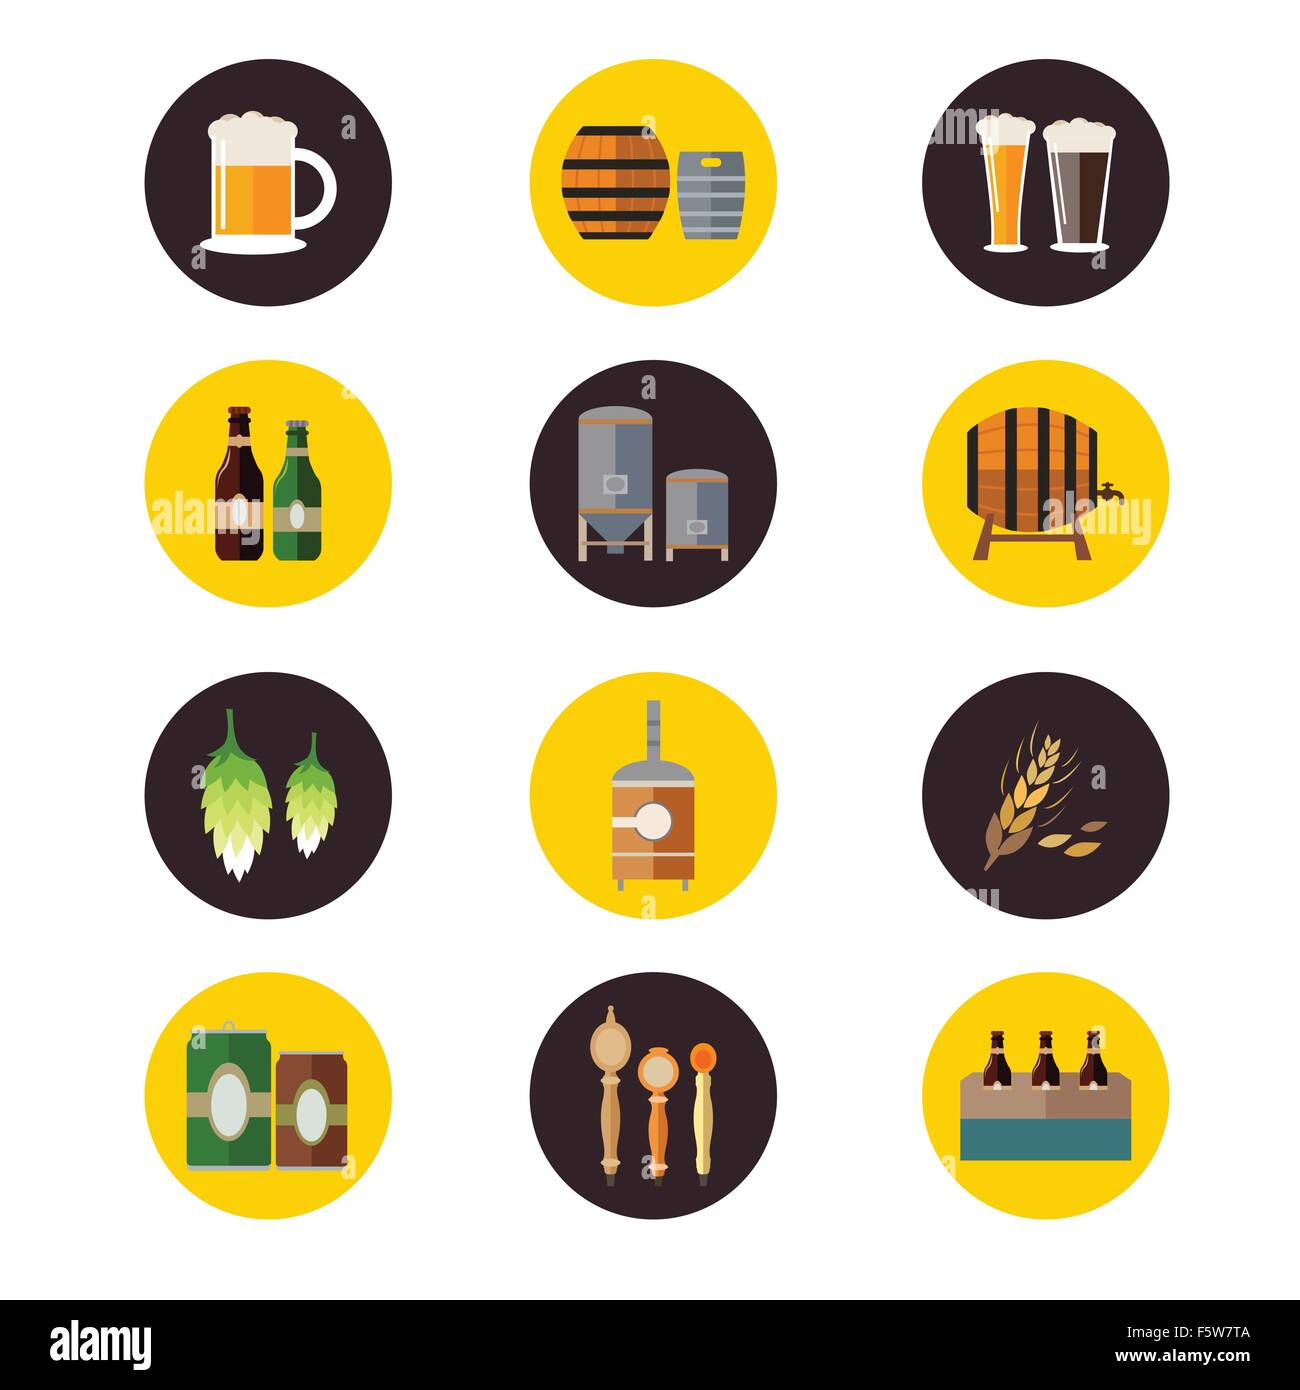 A vector illustration of brewery icon sets Stock Vector